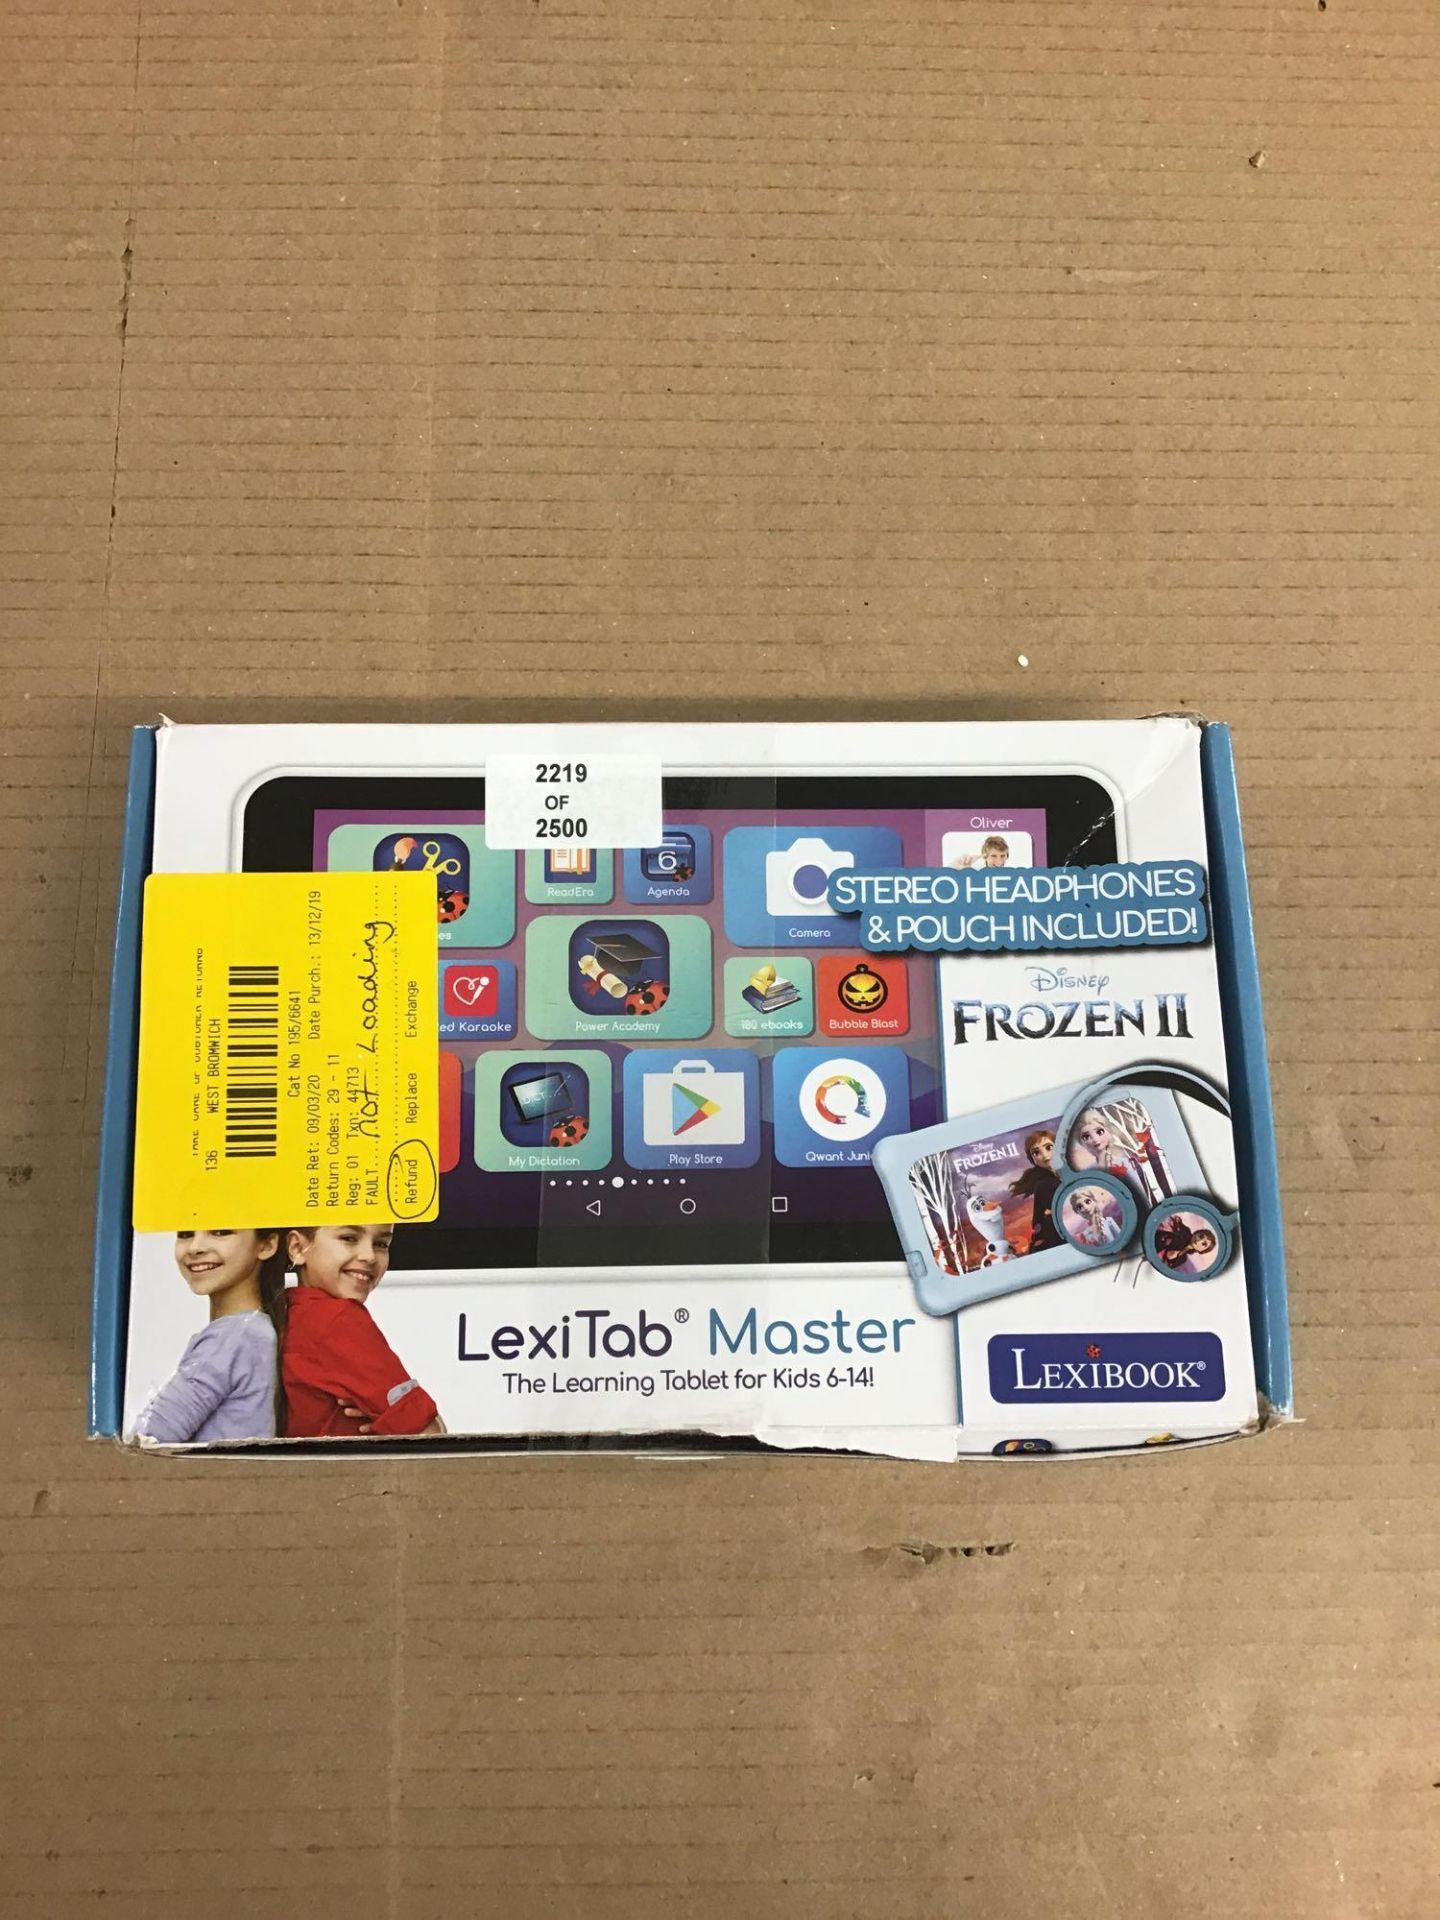 LexiTab Master with Frozen Pouch and Headphones, £80.00 RRP - Image 3 of 5